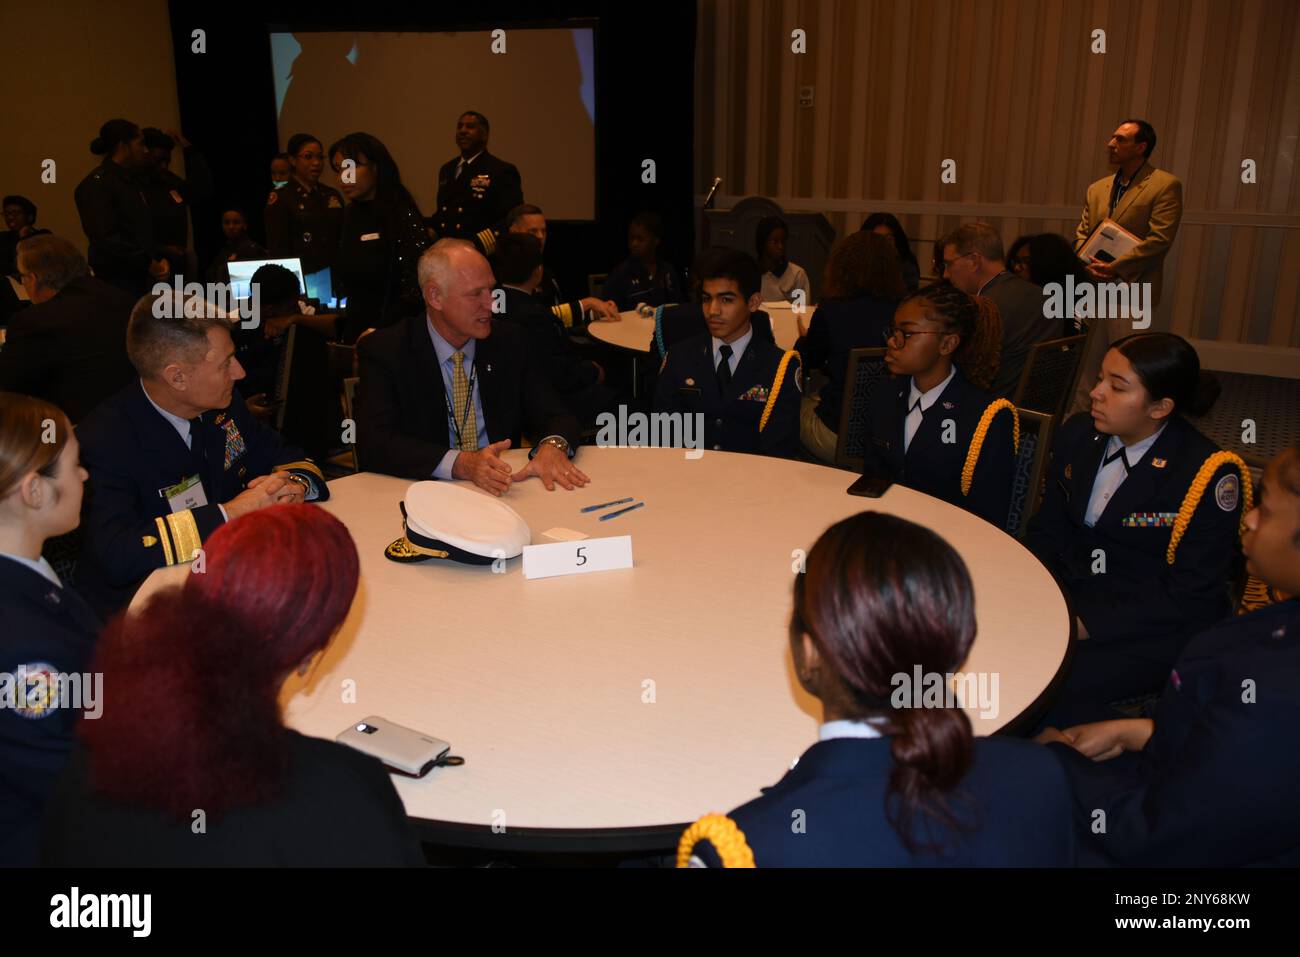 Mike Krause, U.S. Army Space and Missile Defense Command Technical Center acting director, mentors science, technology, engineering and mathematics students from across the nation at the 37th Black Engineer of the Year STEM conference, Feb. 10, in Washington DC. Stock Photo